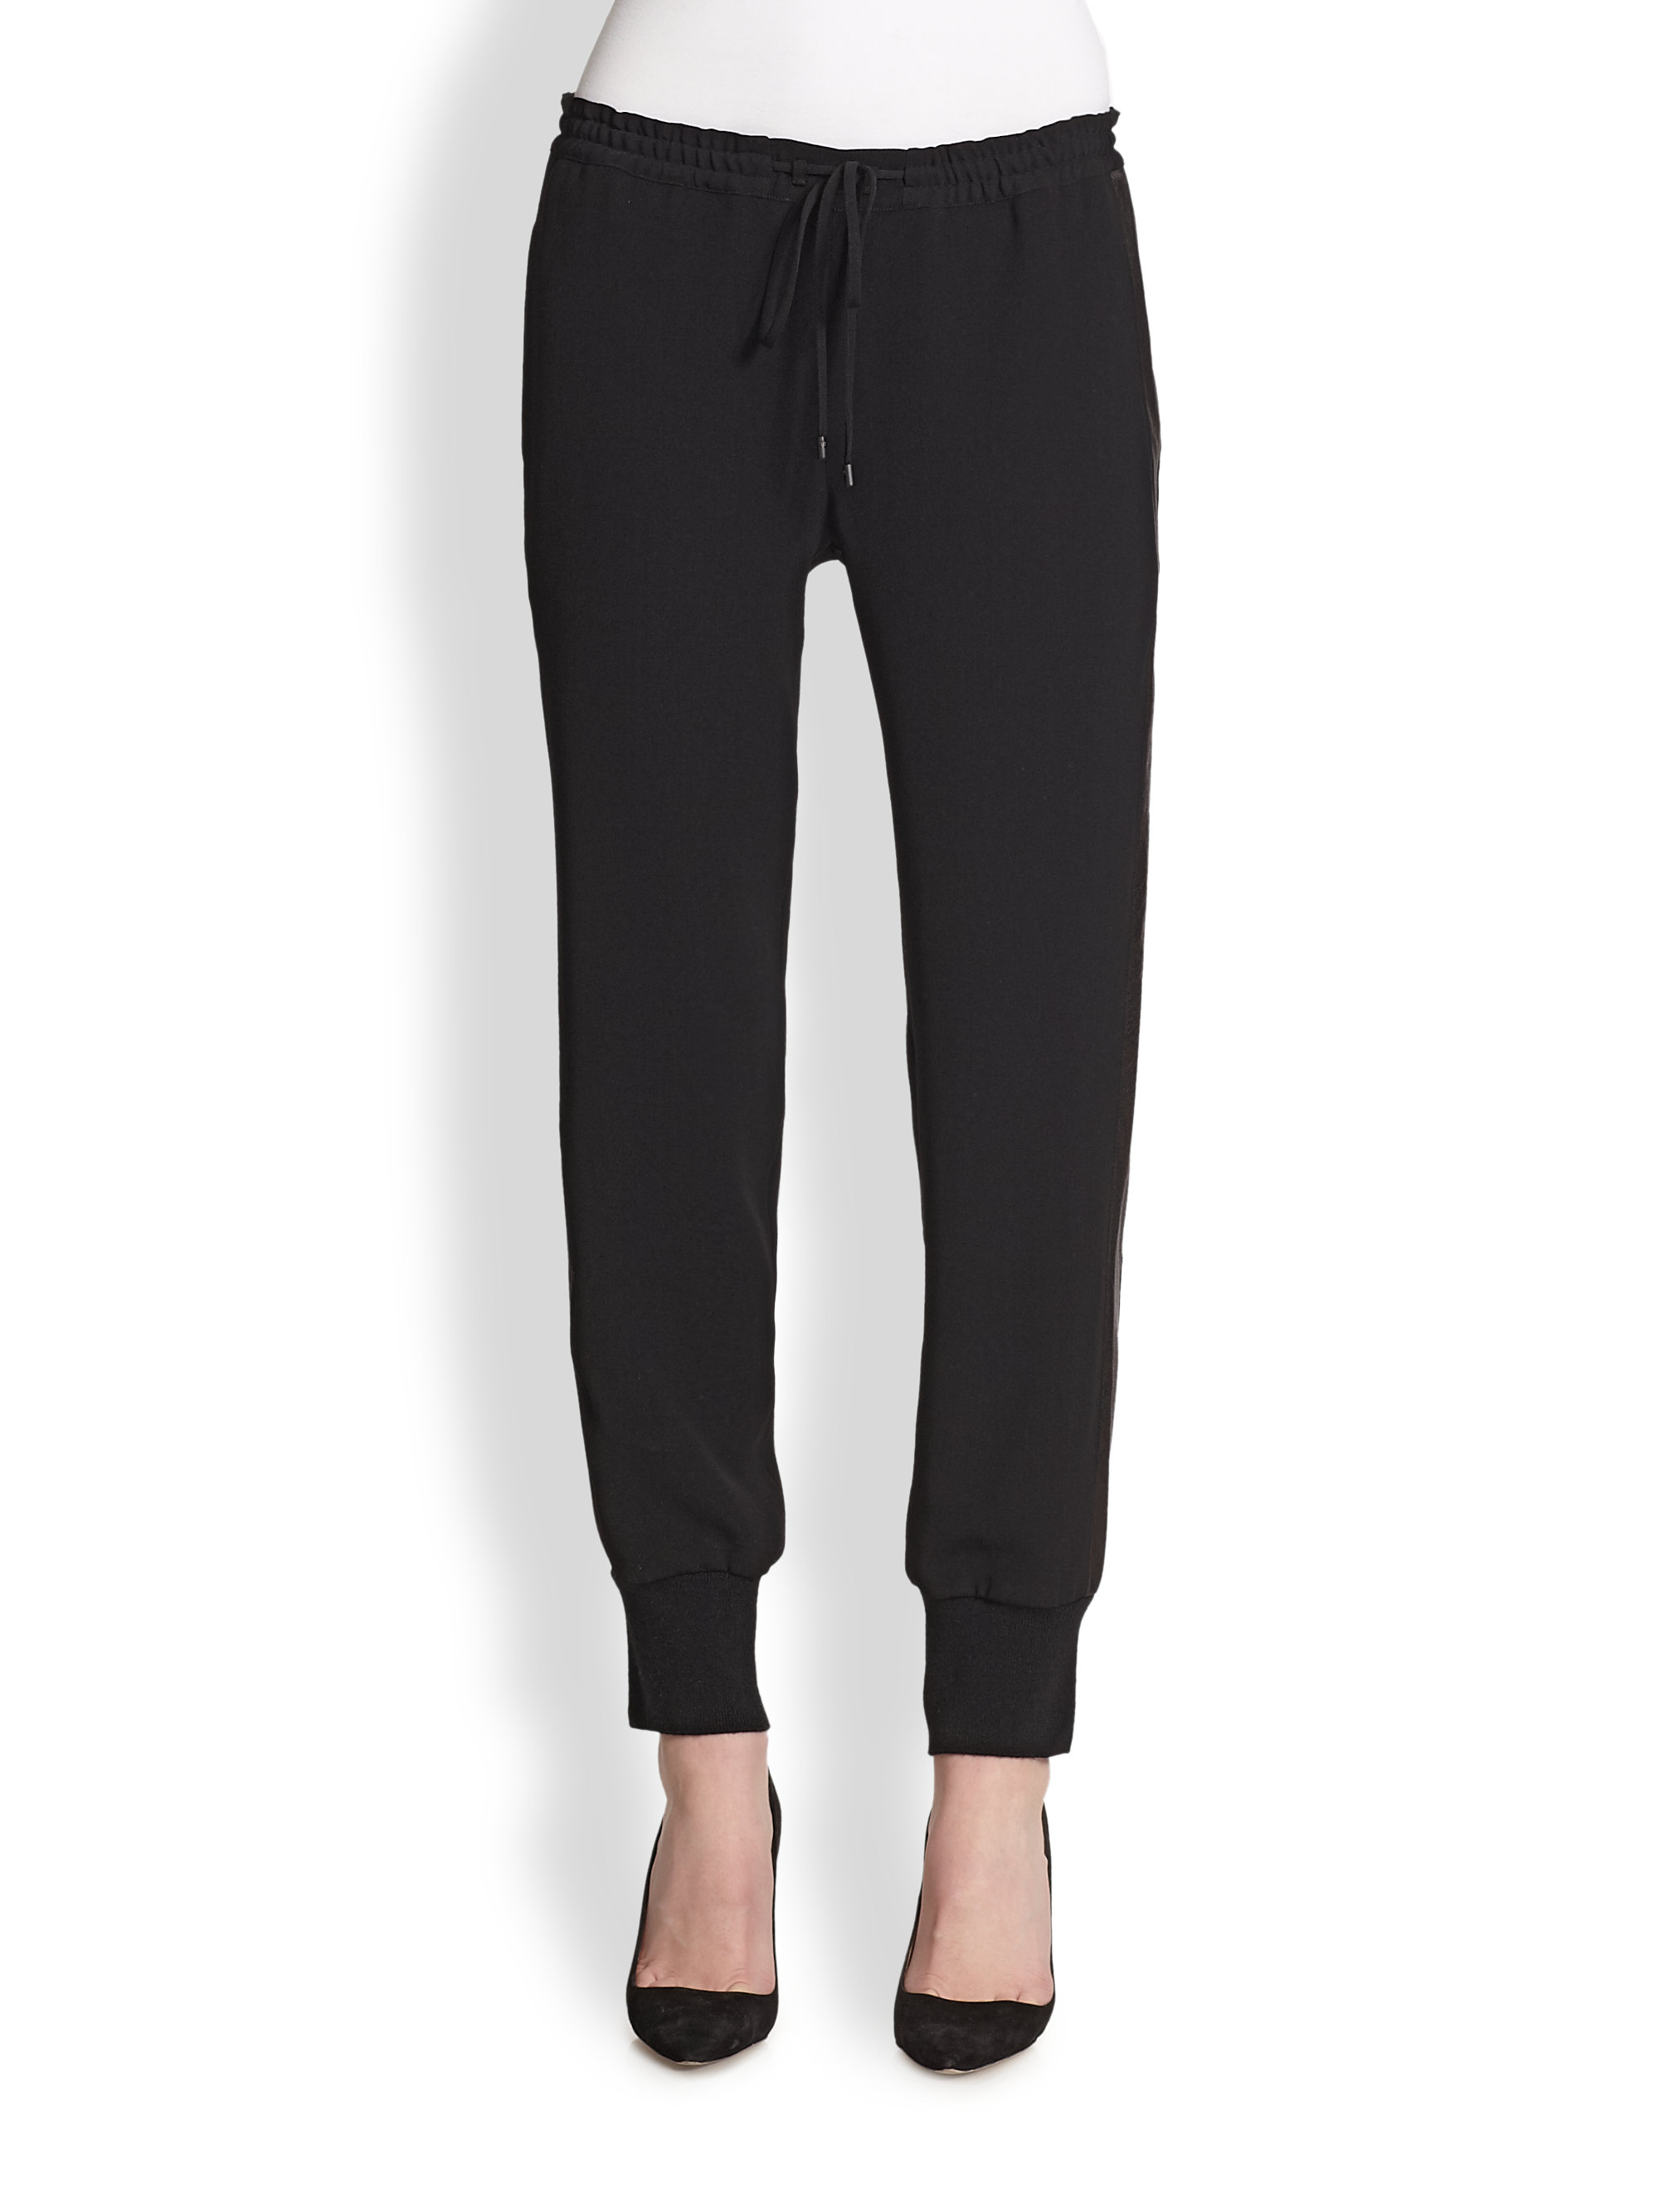 Vince Strapping Leather Stripe Sweatpants in Black | Lyst